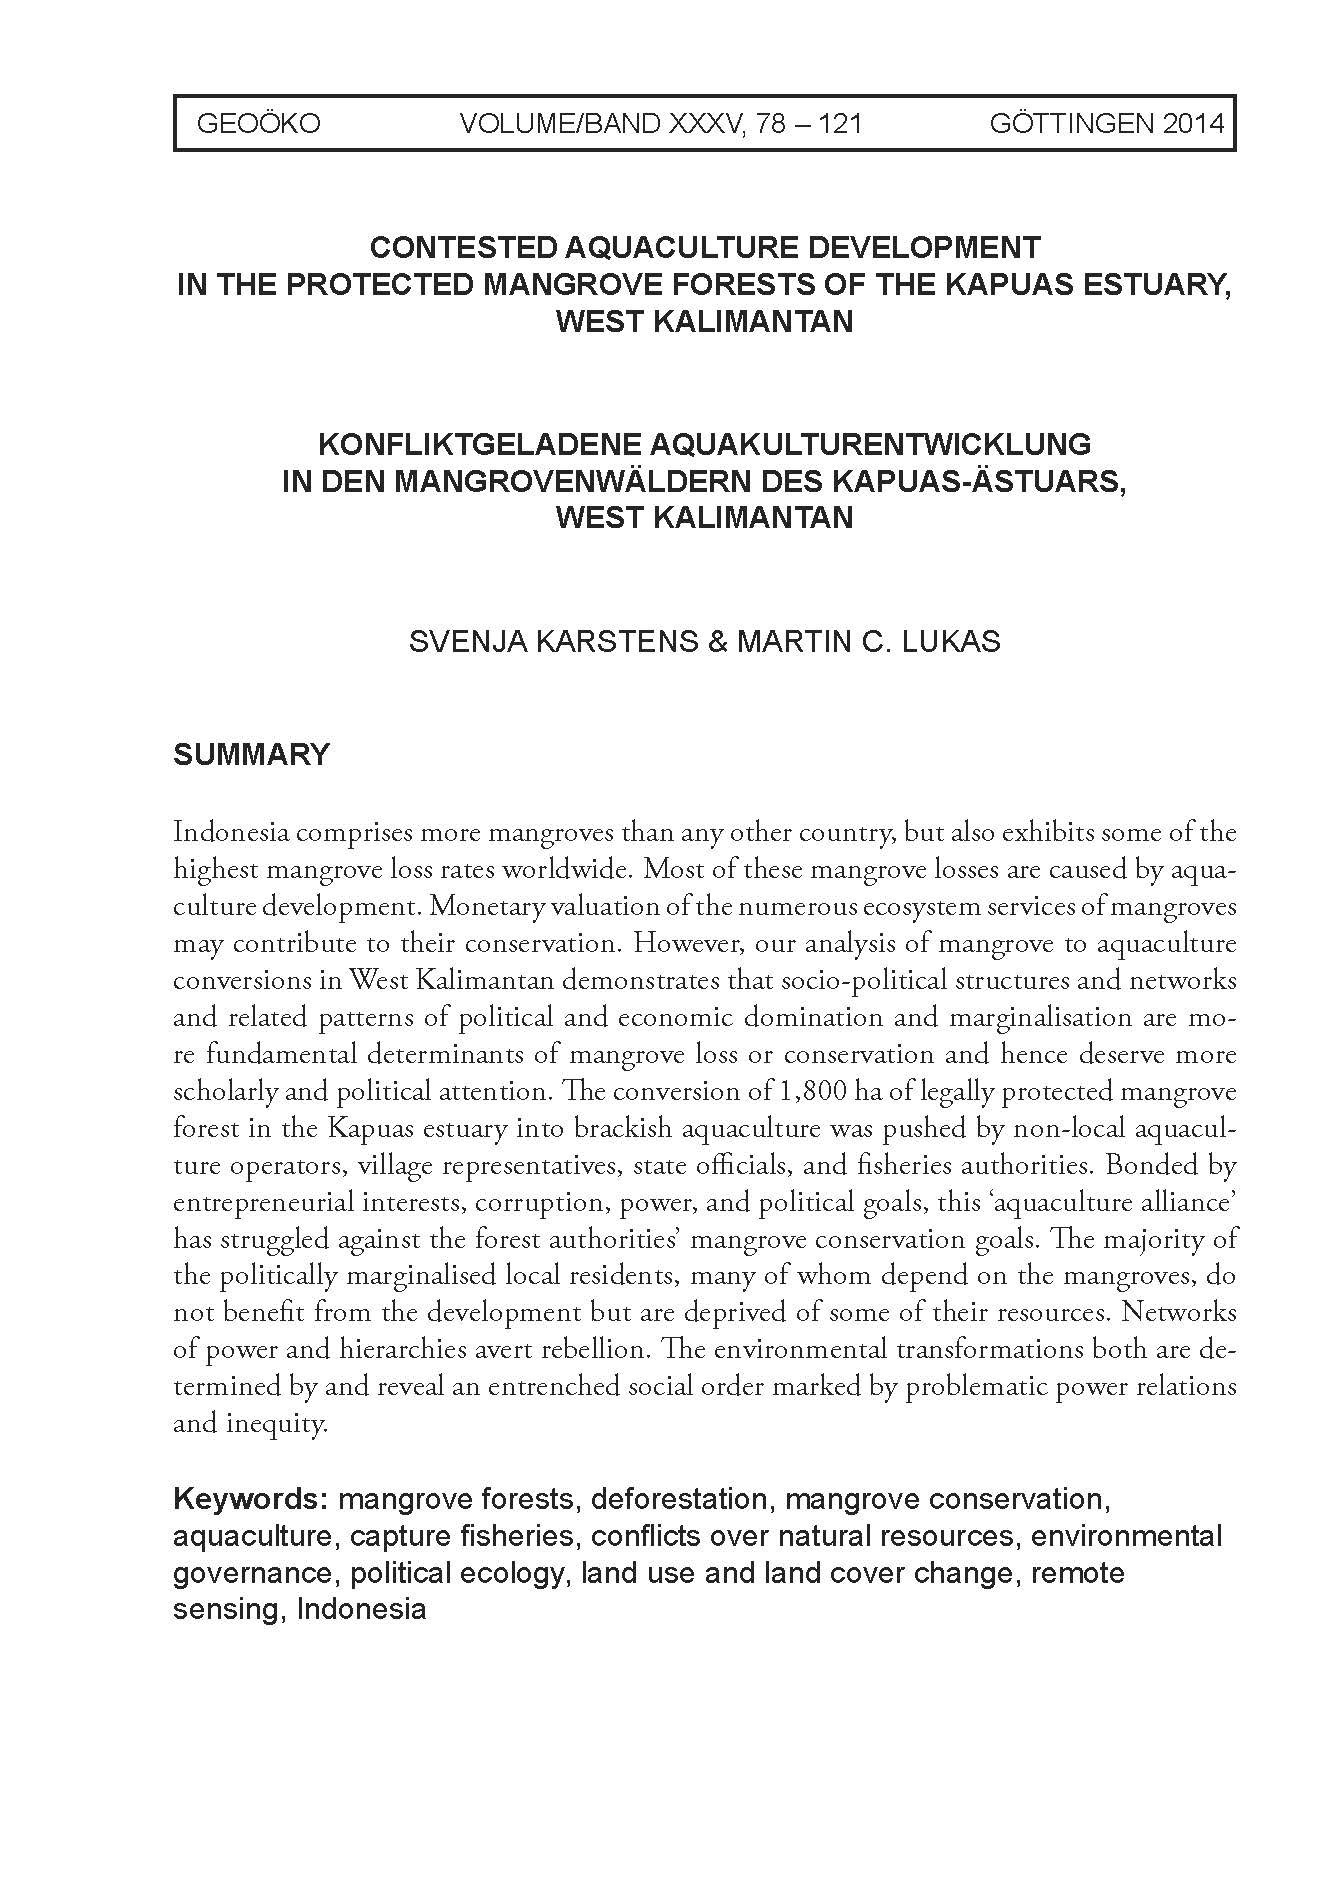 Contested aquaculture development in the protected mangrove forests of the Kapuas estuary, West Kalimantan